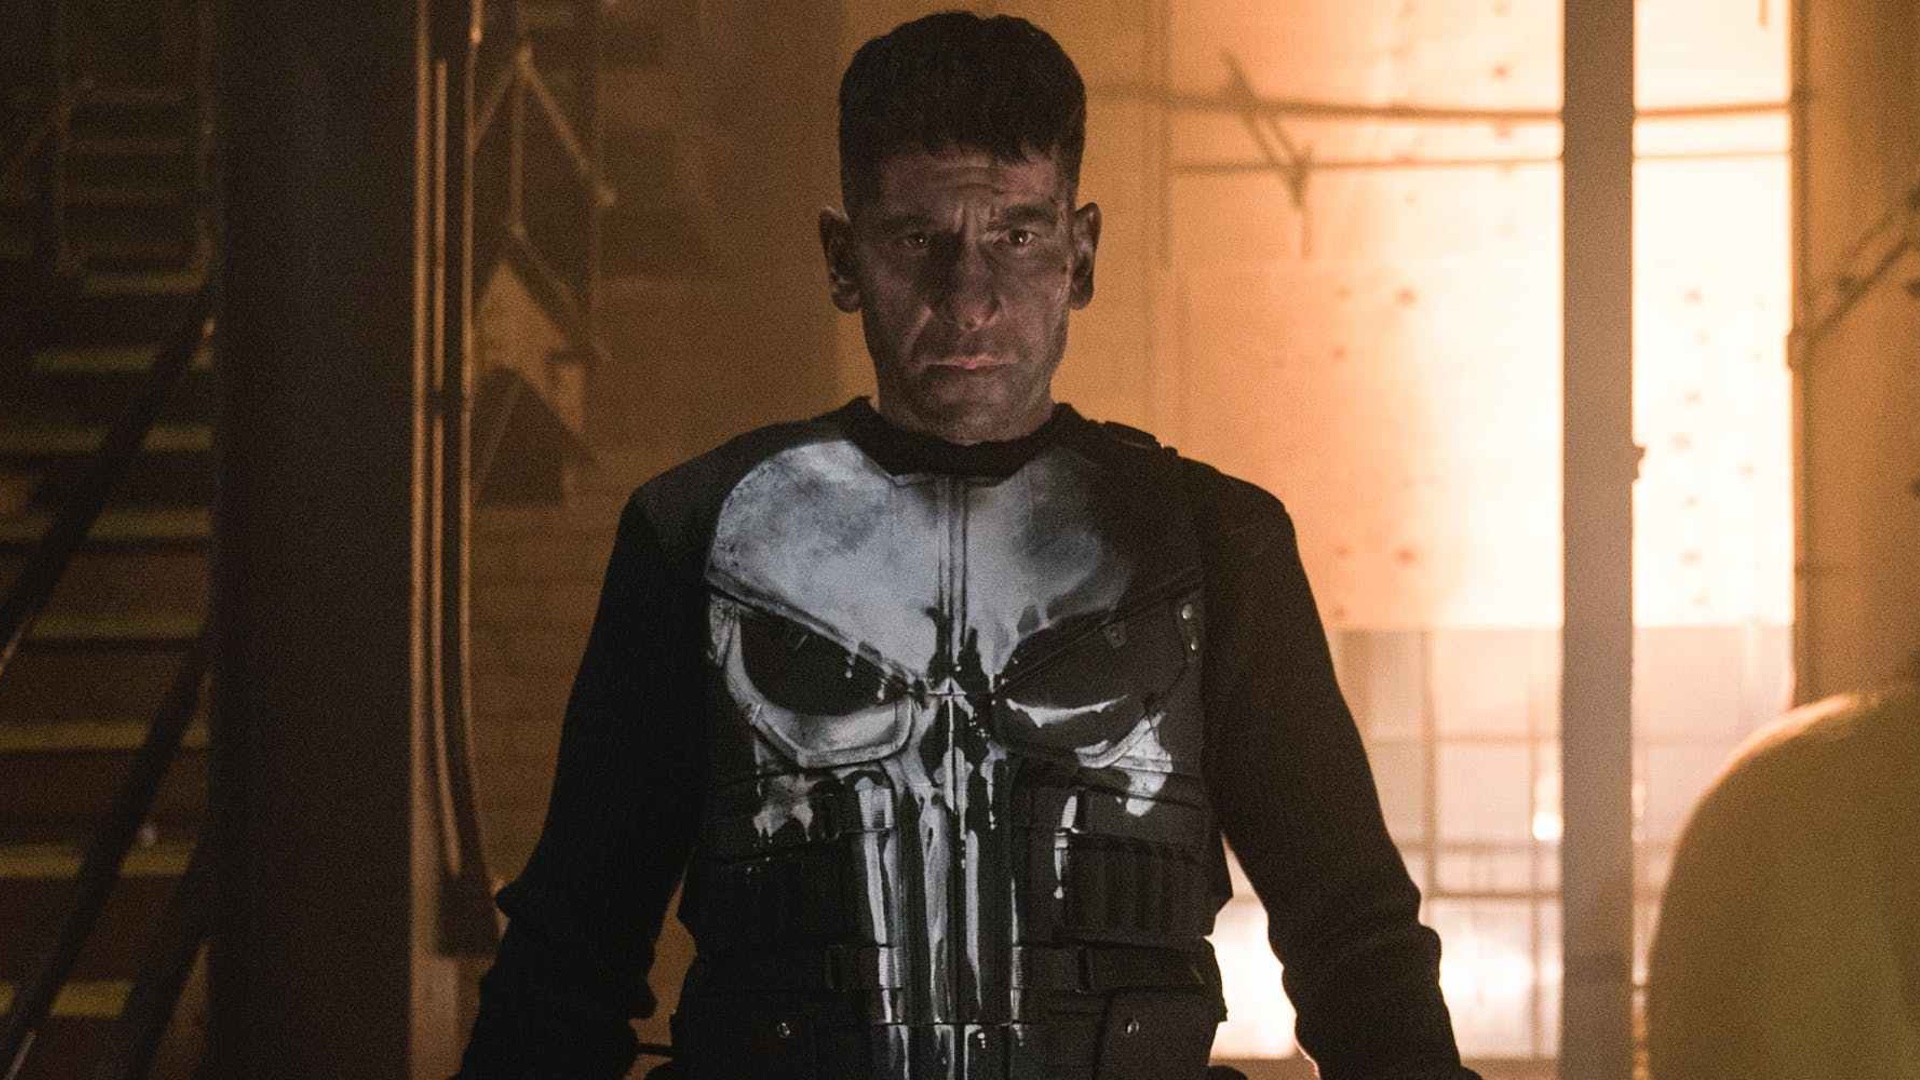 Punisher Revival – Rosario Dawson Says She Heard It’s Happening [UPDATED]